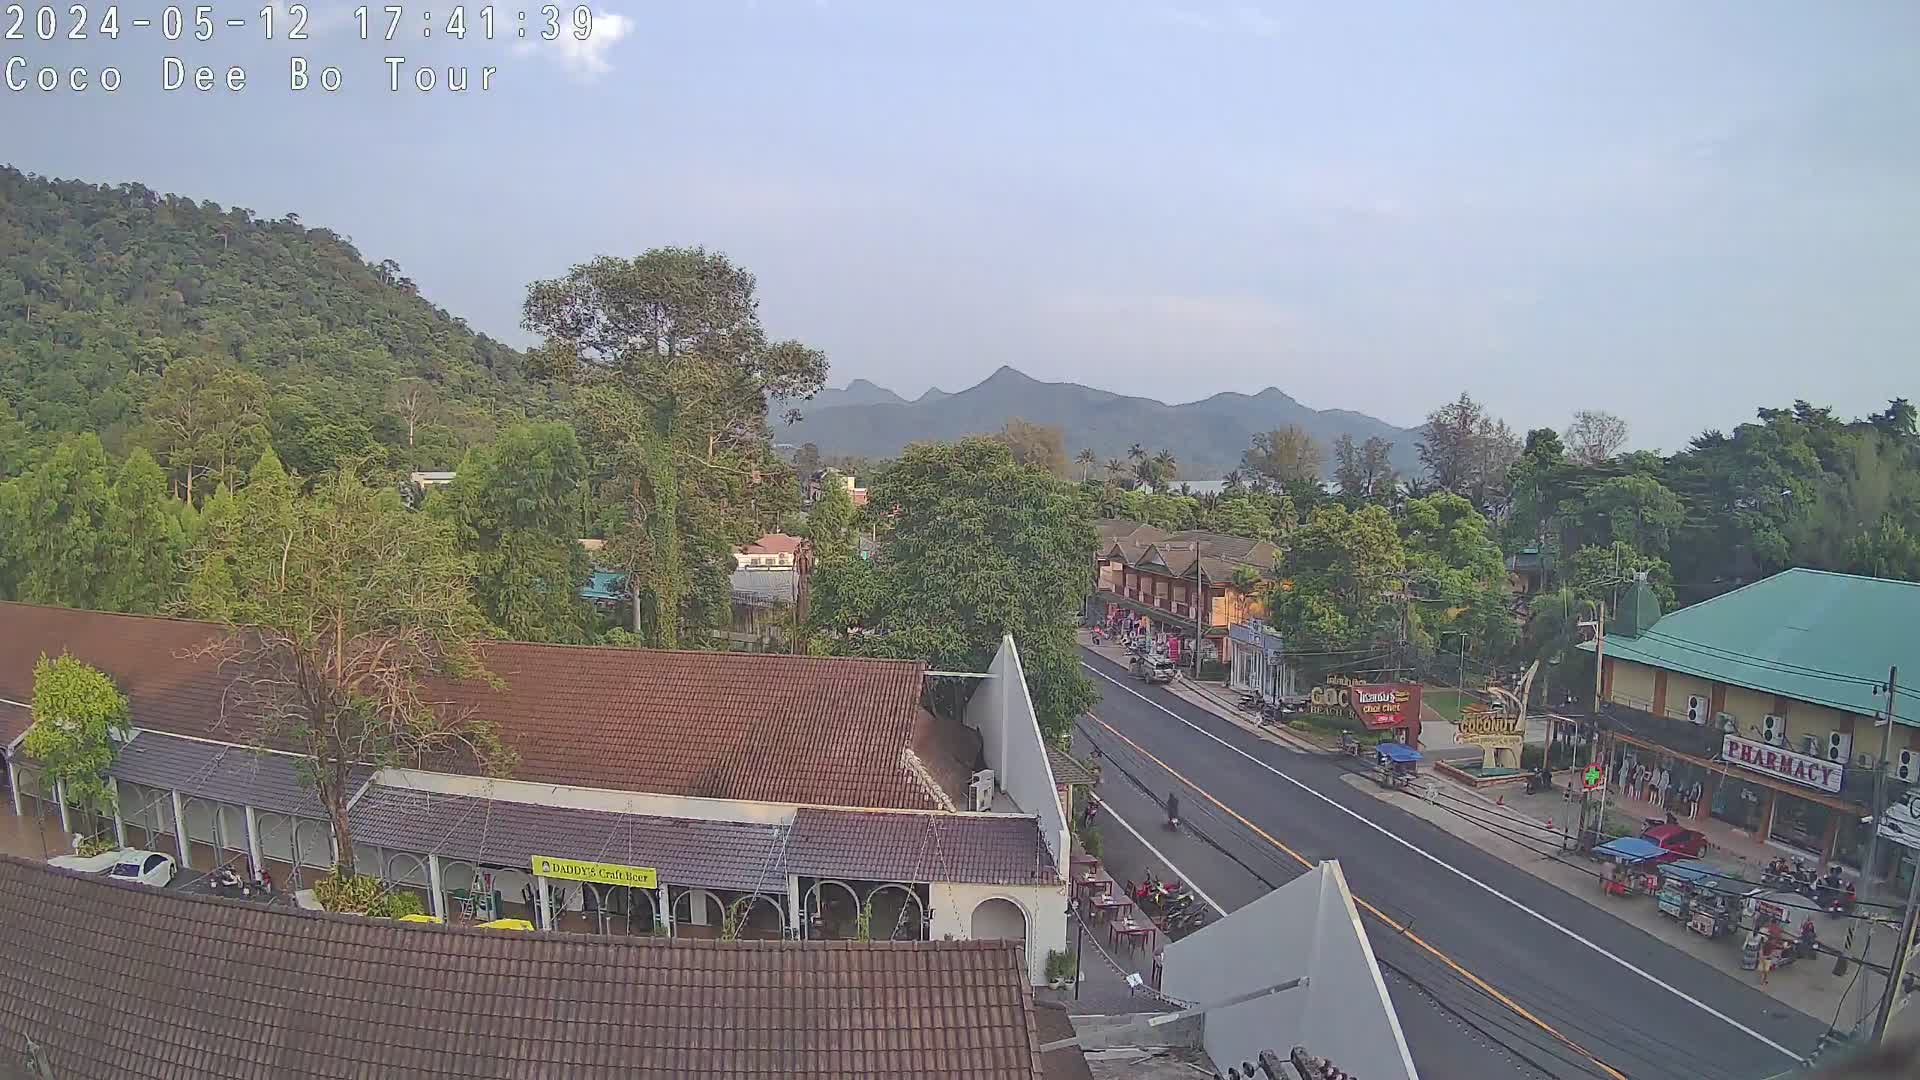 Koh Chang Webcam 1 is offline at this time